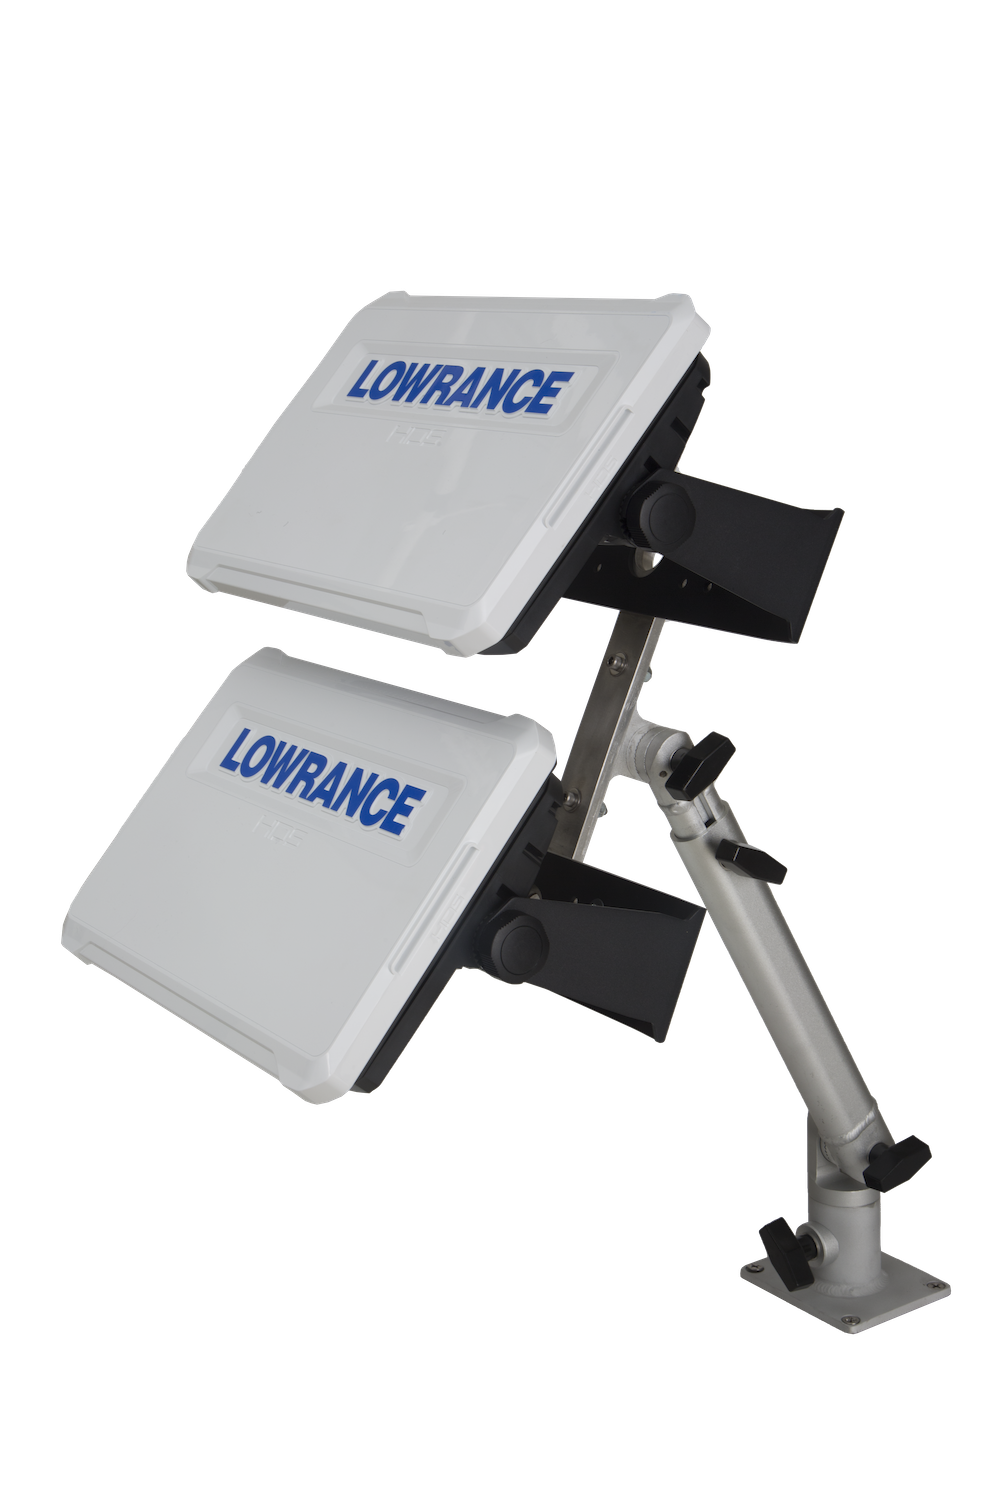 Stowaway Mounts designed for marine electronic mounts featuring